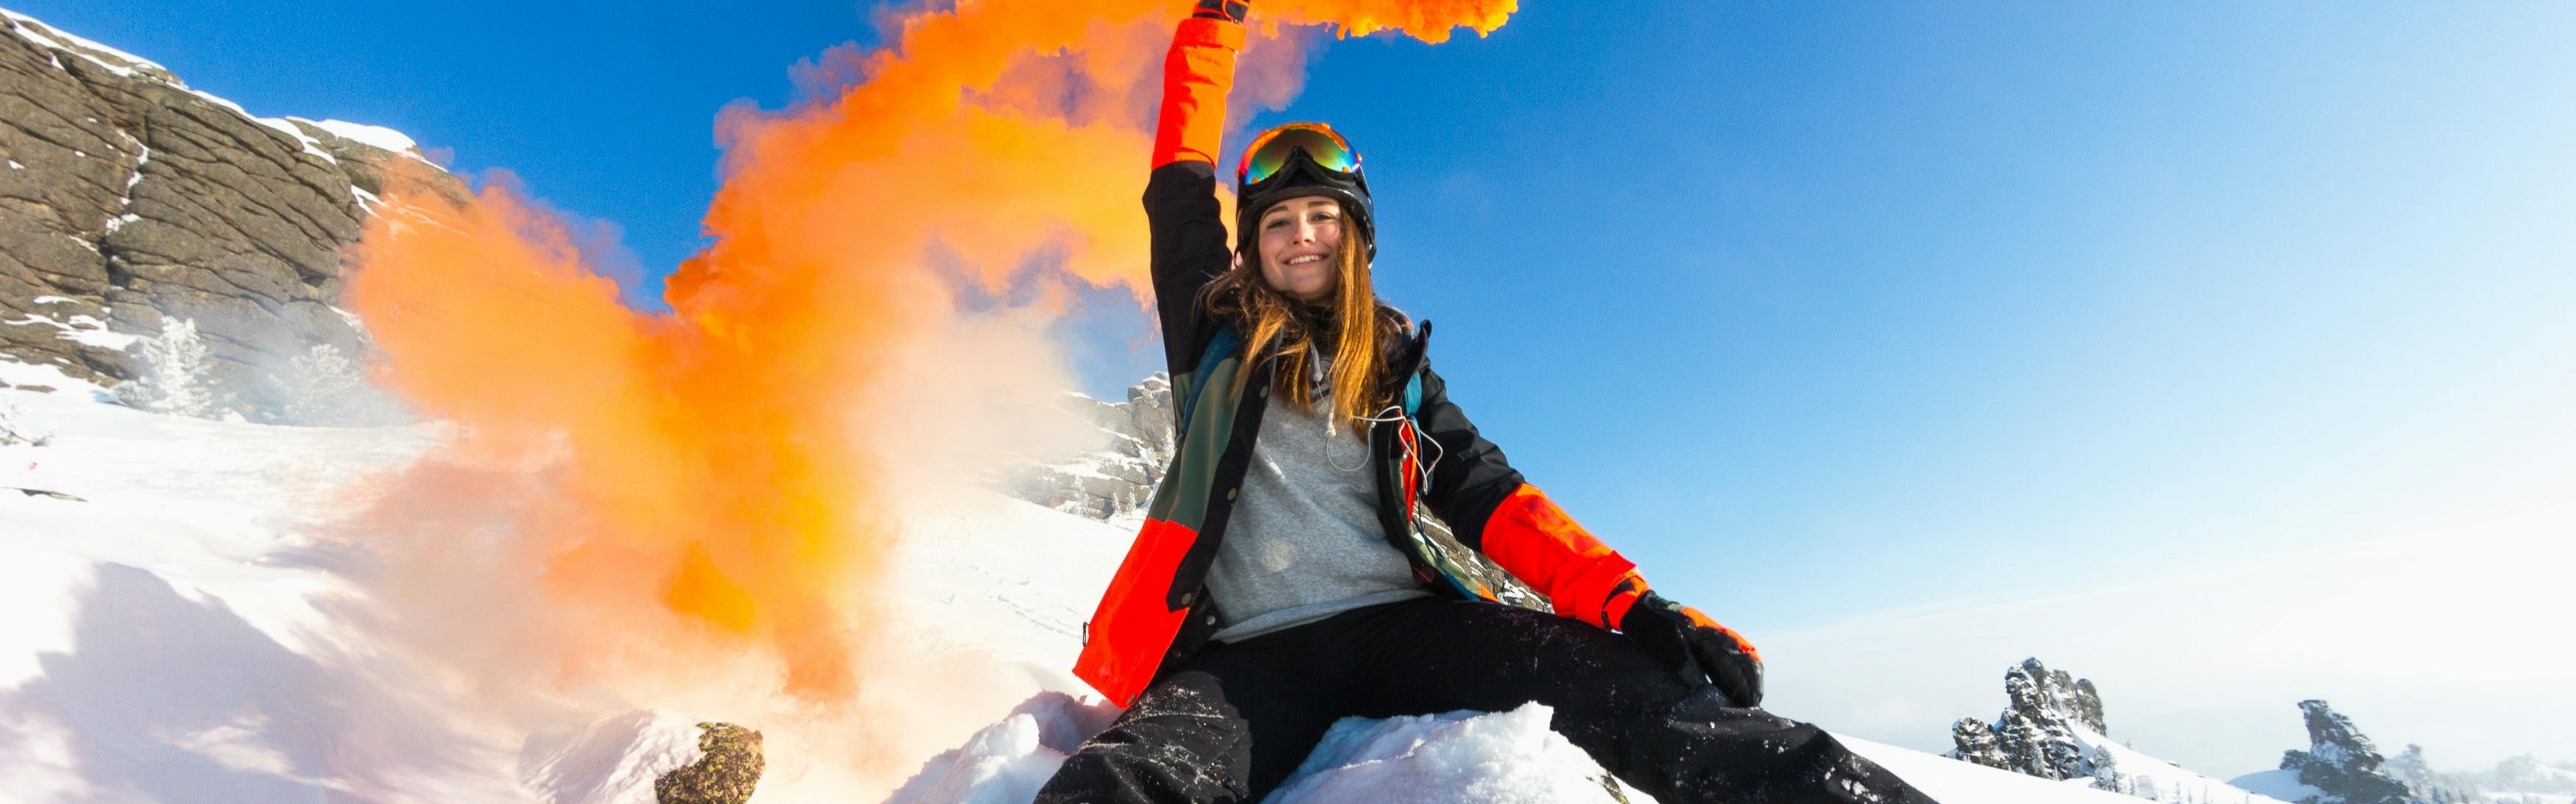 A woman in ski gear sits on a snowy rock with a firework.